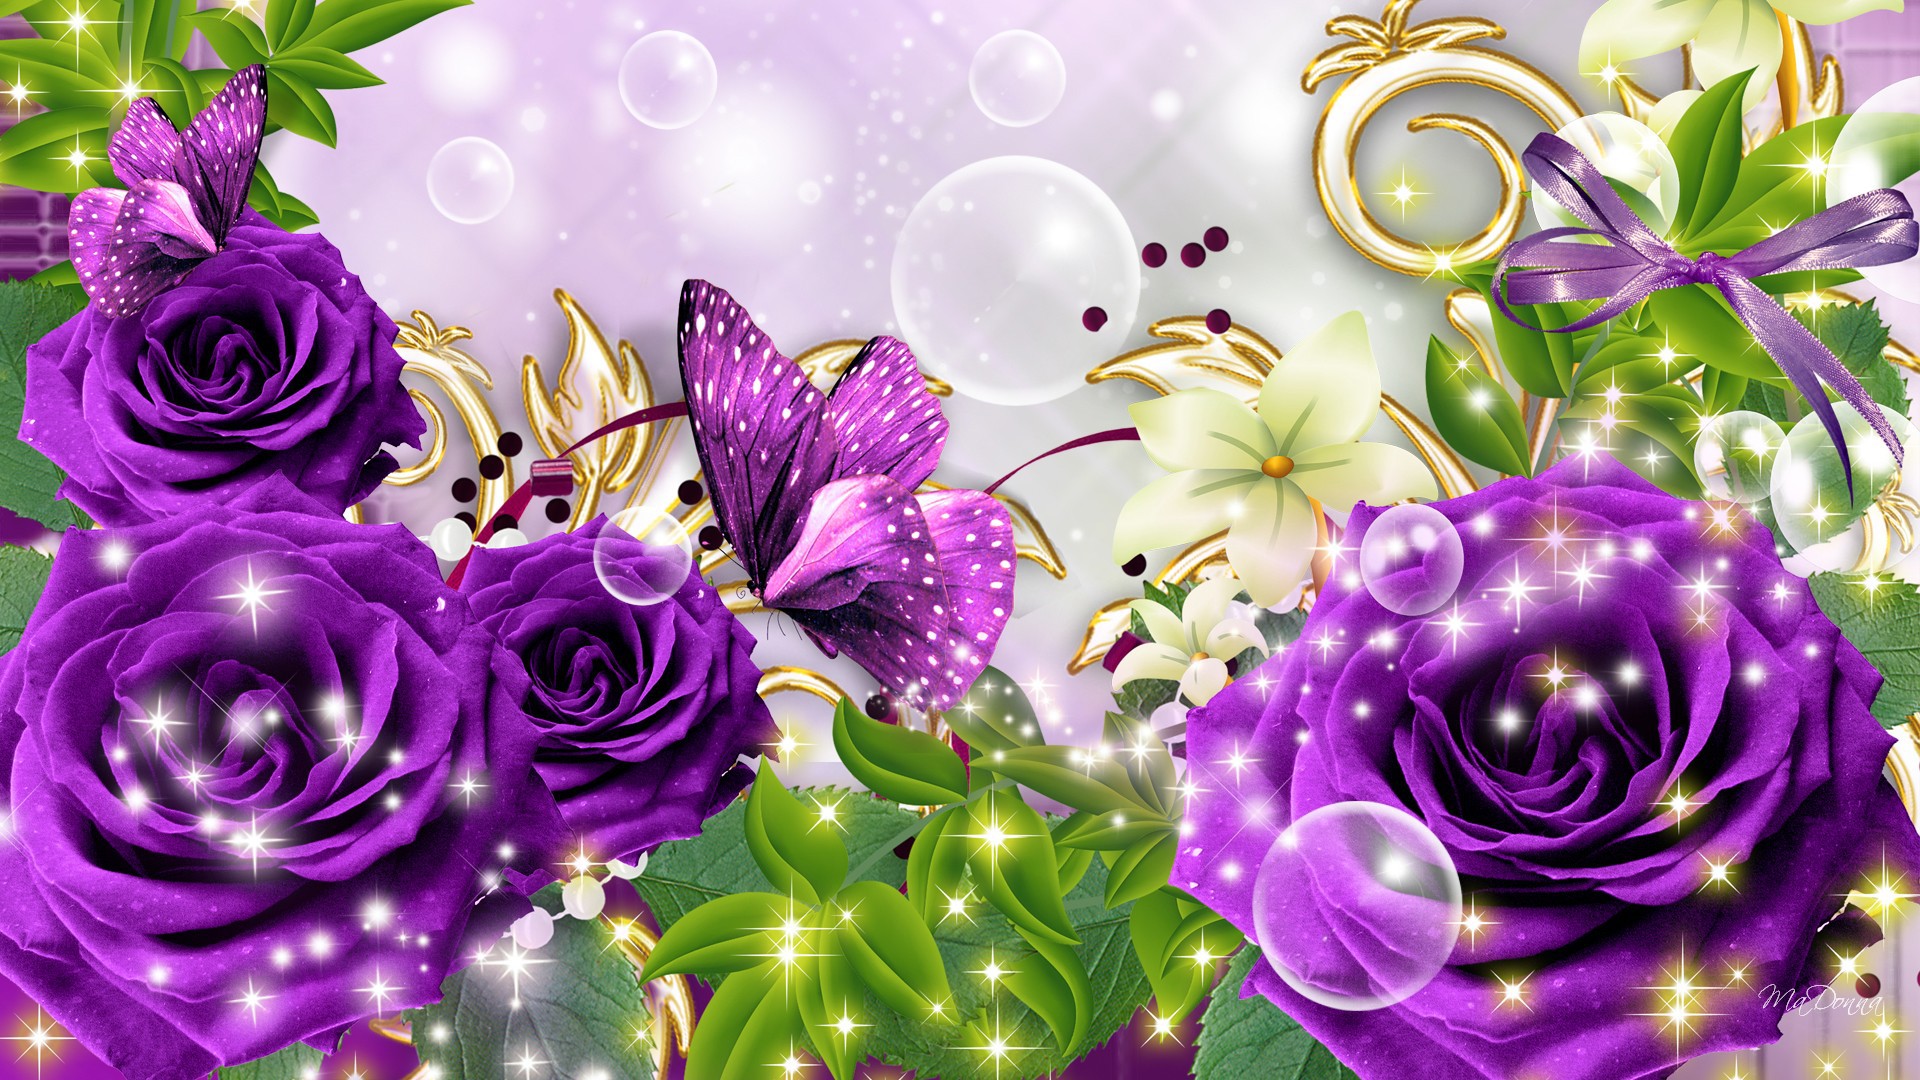 Purple Roses And Butterfly Picture On March